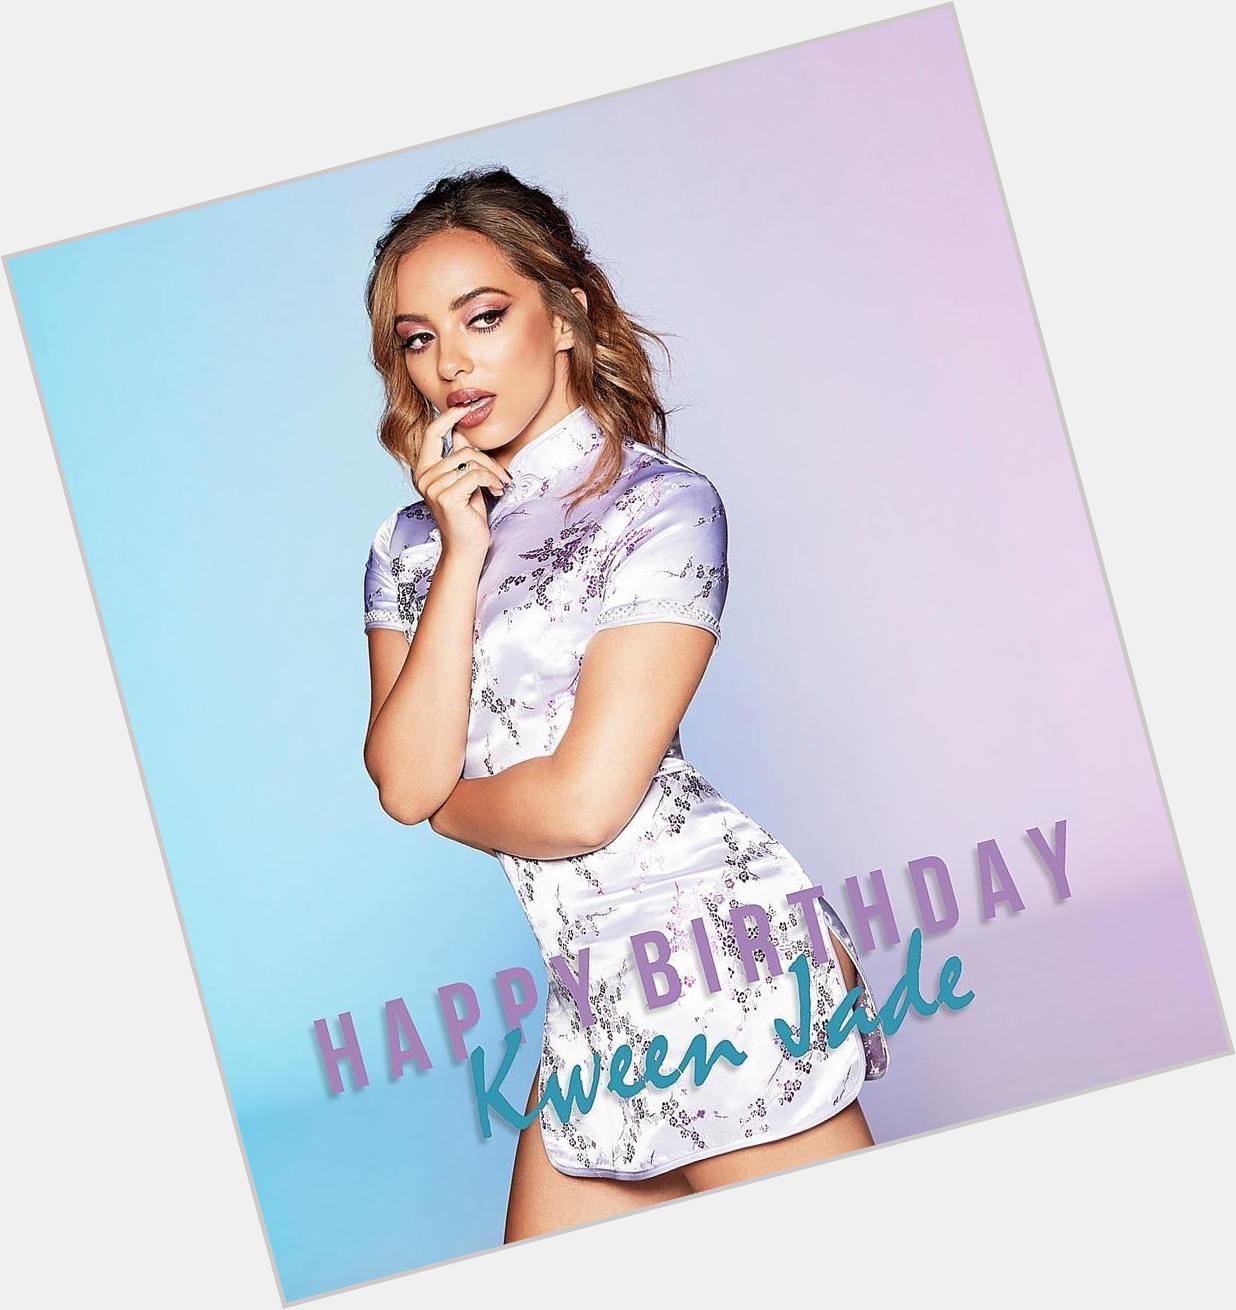 Happy birthday to the most pretty fashionable and a queen of jade thirlwall we love you so much 